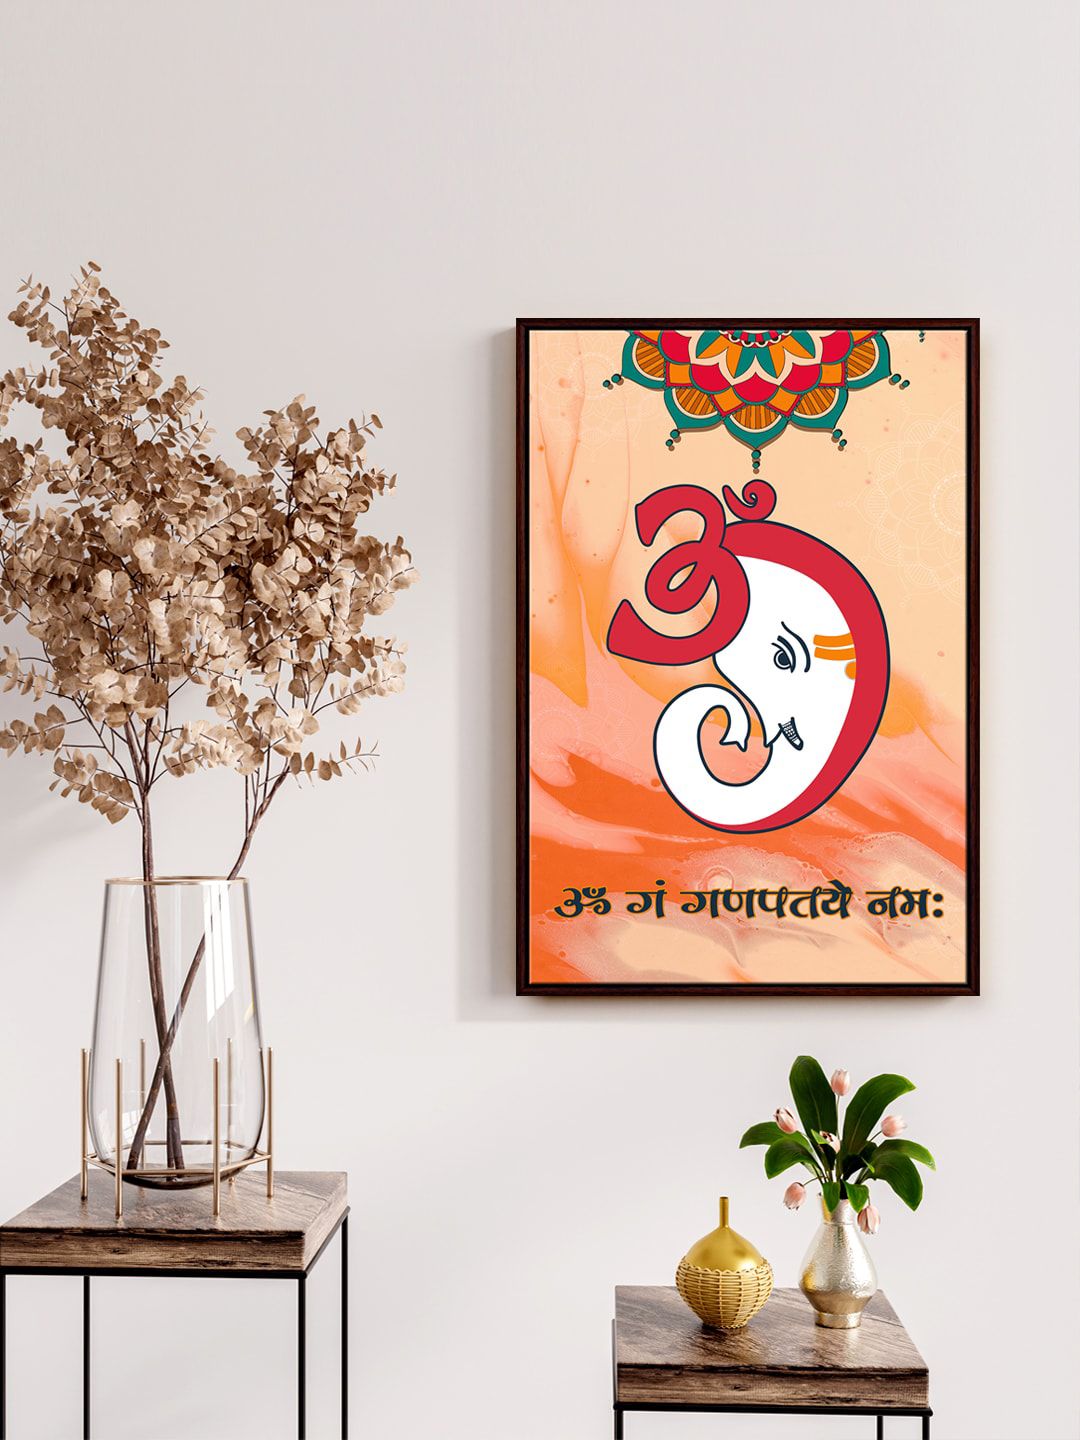 999Store Orange & Green Ganesh Mantra Printed Framed Wall Painting Price in India